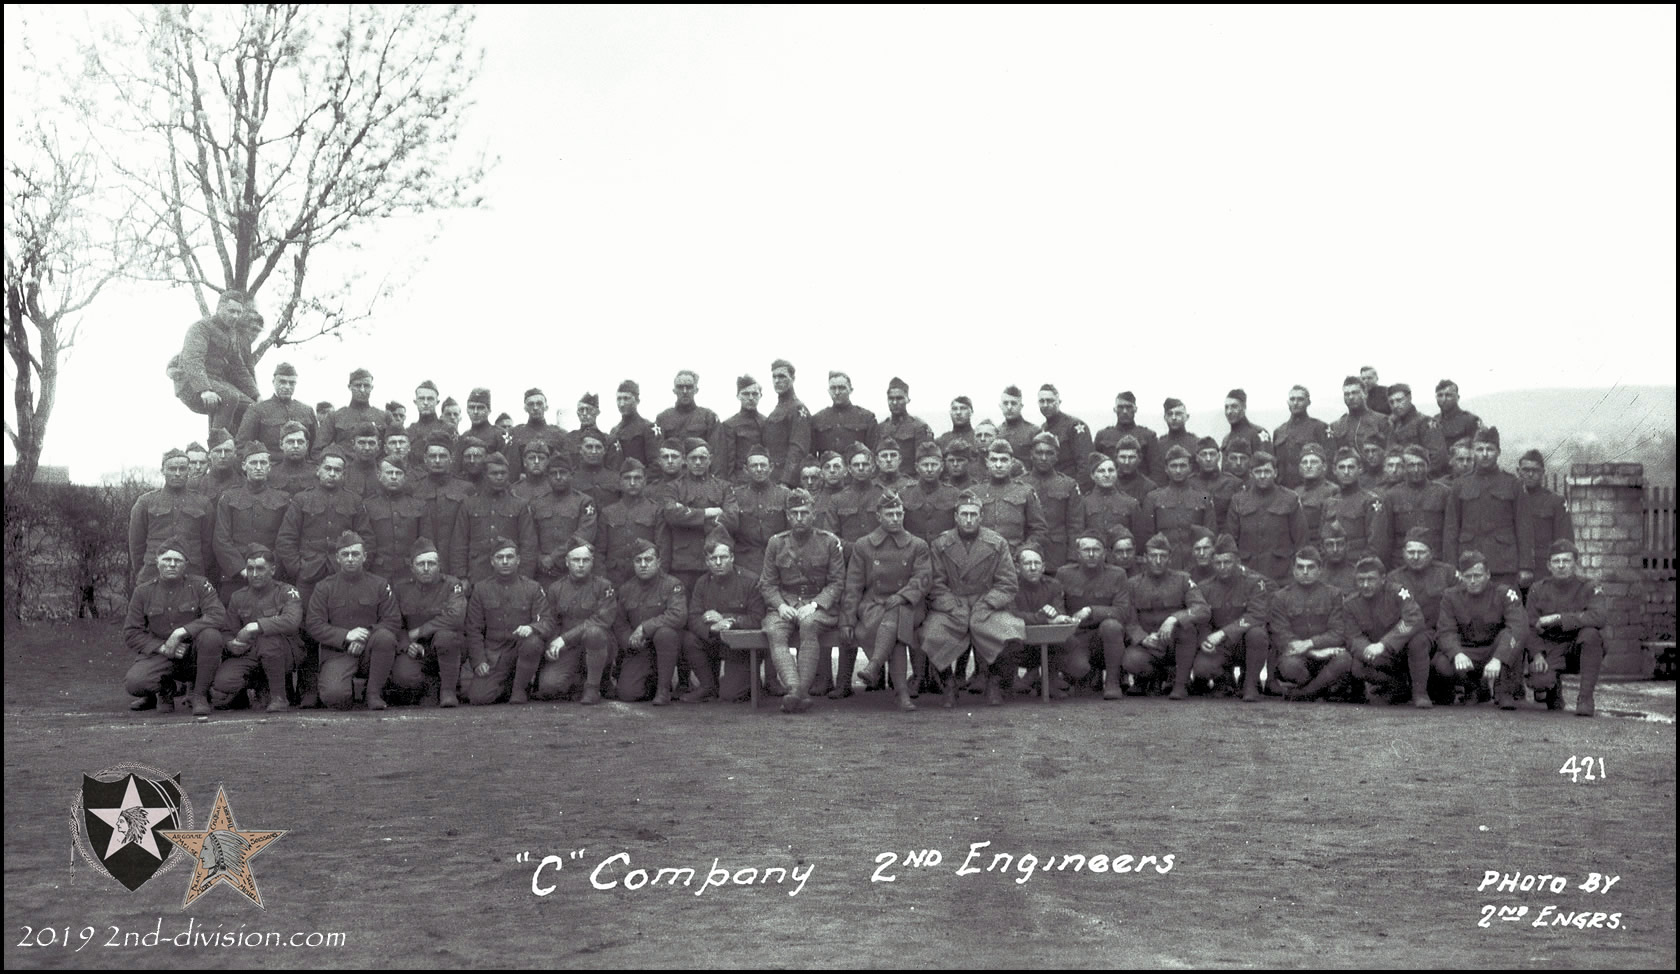 Company C; 2nd Engineers. There are approximately 95 men here. They are survivors of Belleau Wood.